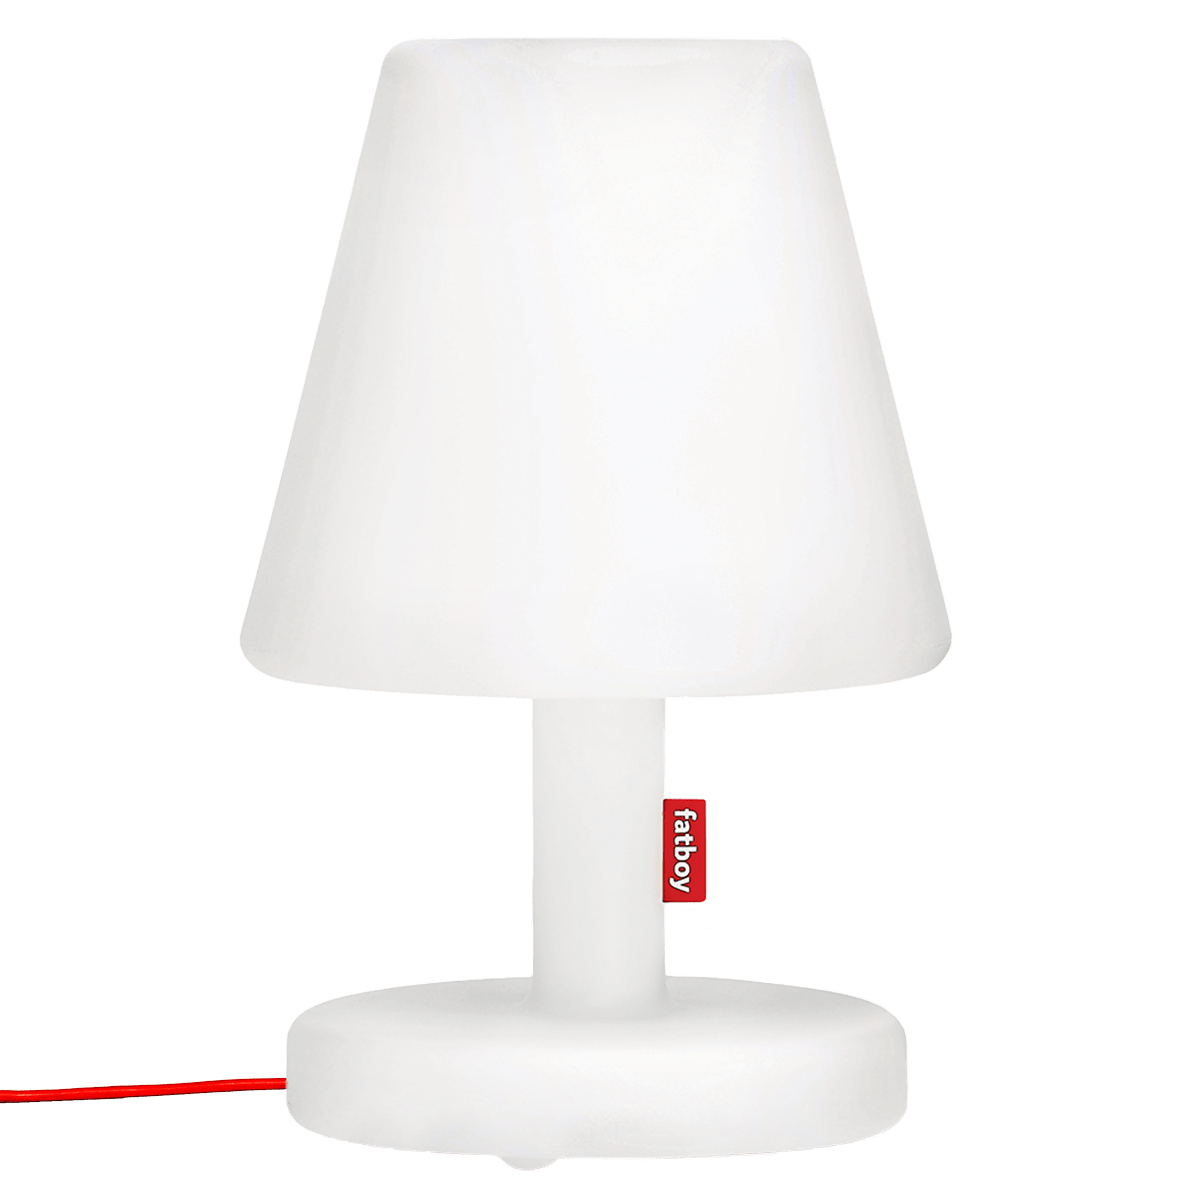 Betrokken het doel agentschap Edison the Medium: A large table lamp suitable for indoors or outdoors |  Fatboy